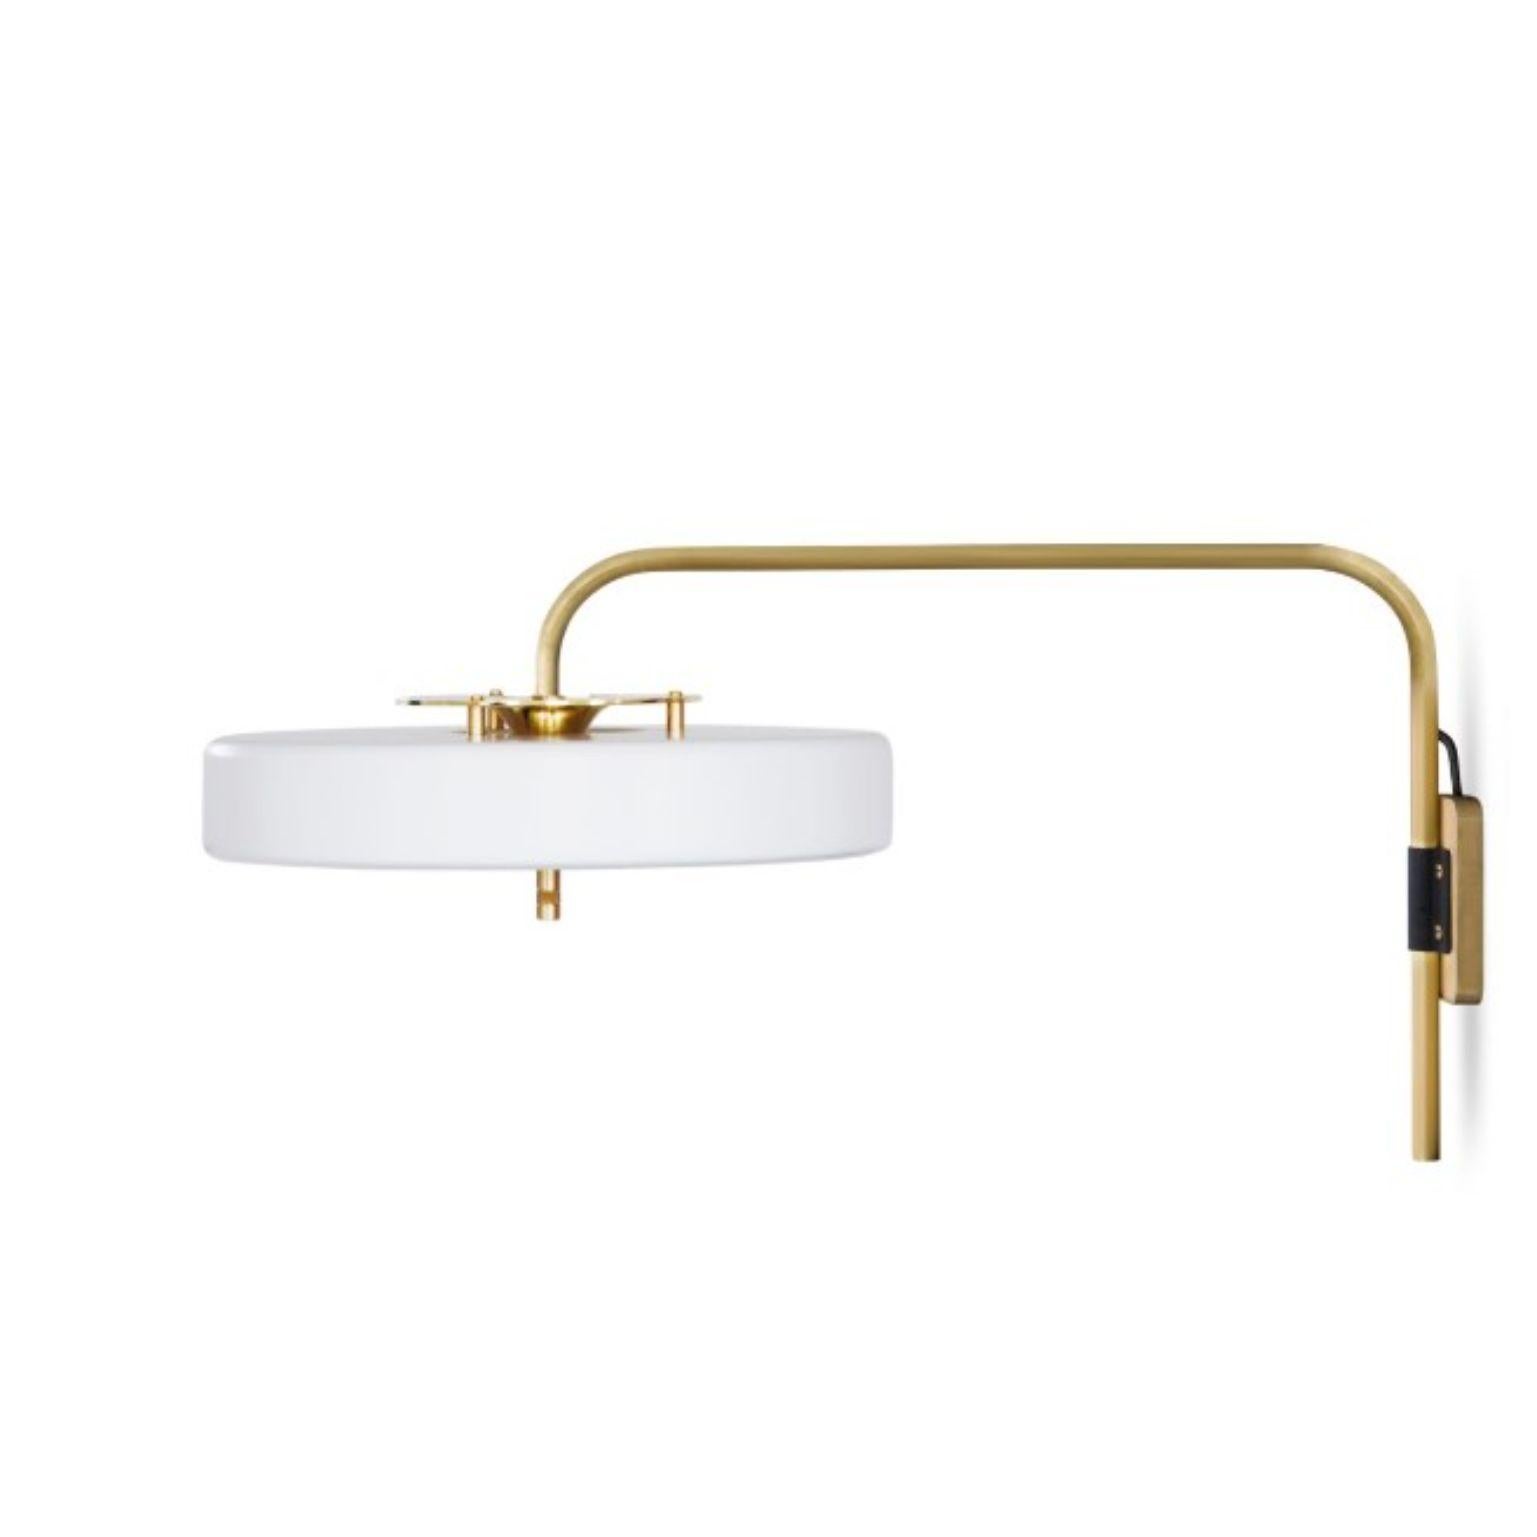 British Revolve Wall Light, Polished Brass, White by Bert Frank For Sale